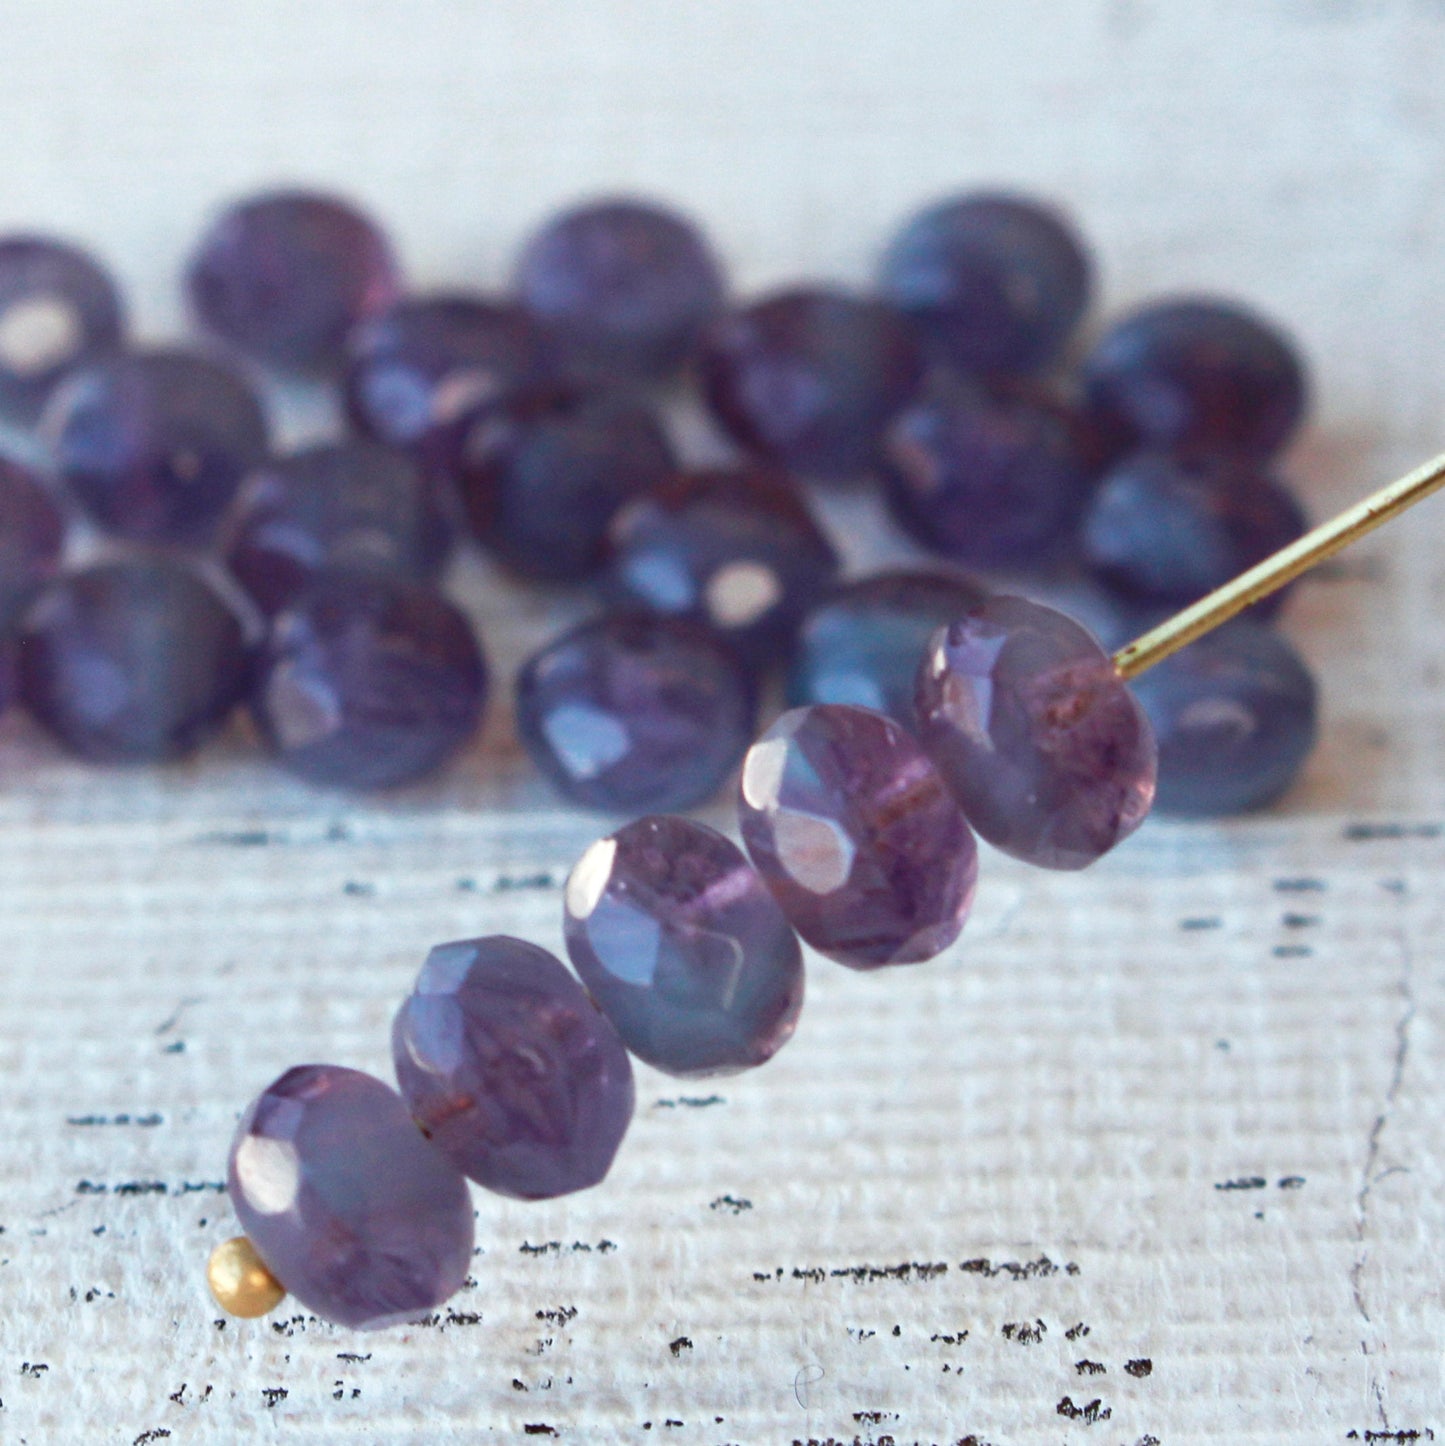 Load image into Gallery viewer, 7x5mm Firepolished Rondelle Beads - Lavender Mix - 25 Beads
